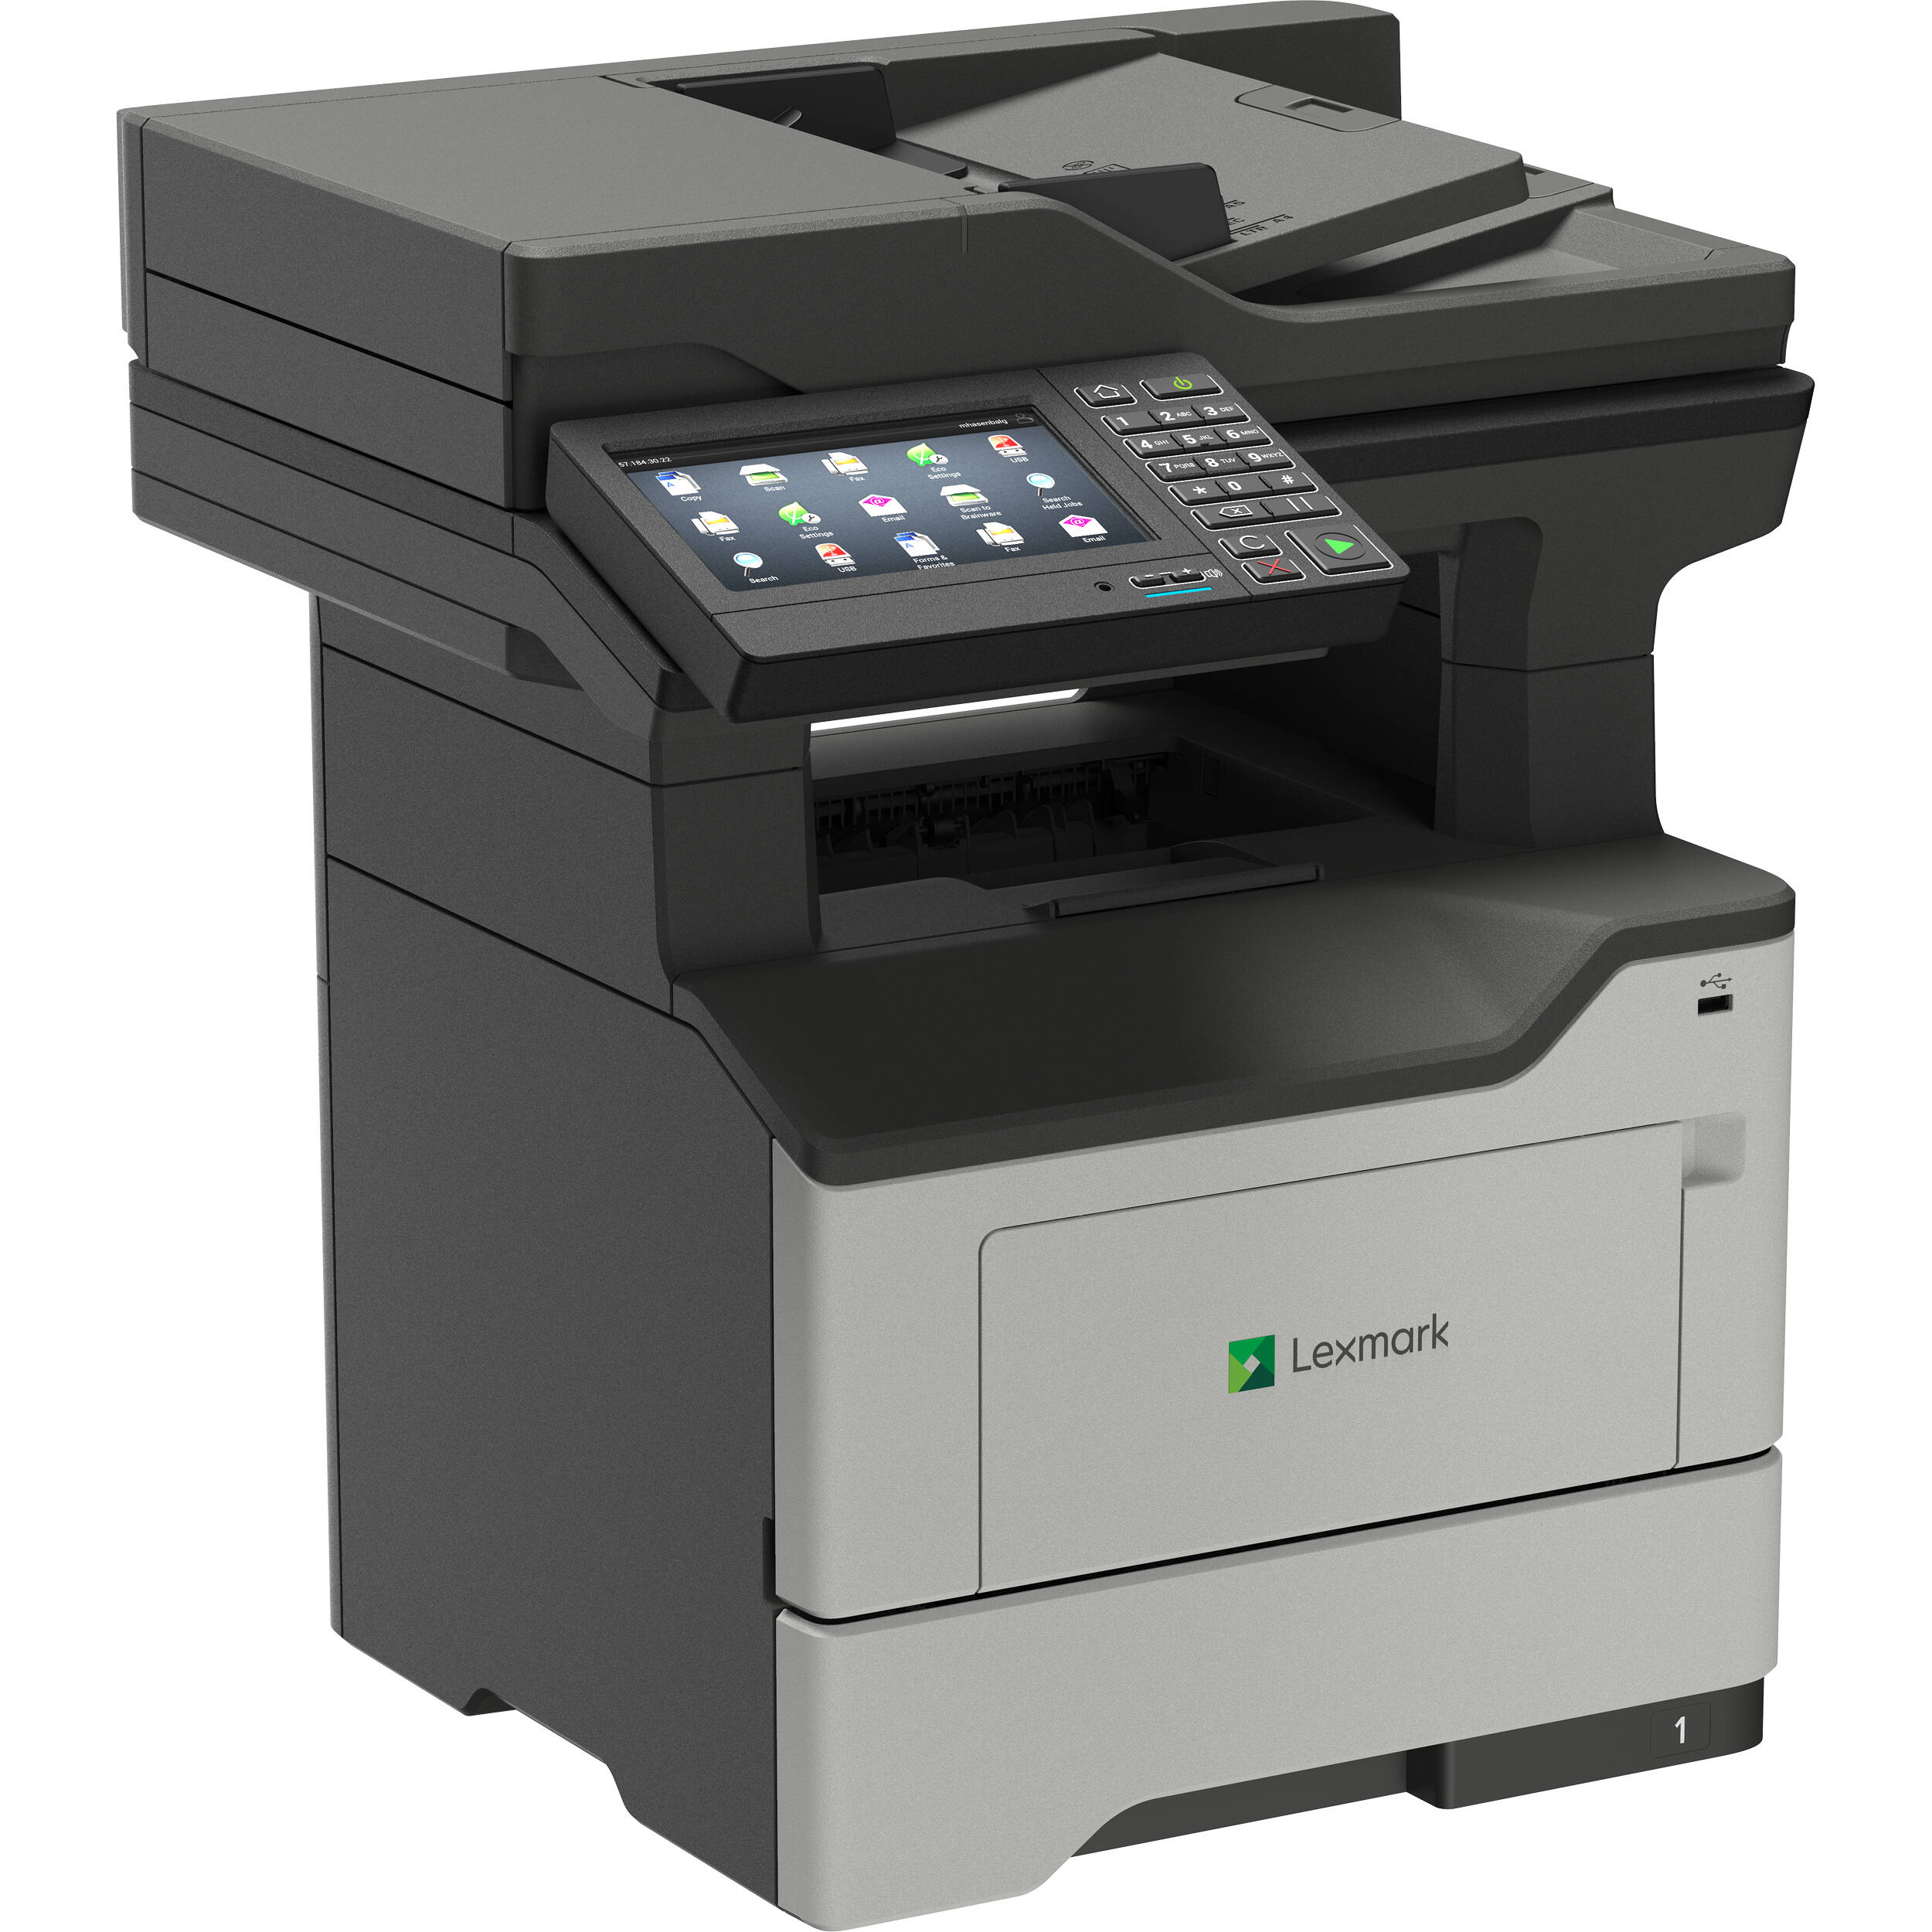 Lexmark Mb2650adwe Monochrome Multifunction MFN Laser Printer Copier Scanner with Wireless Connectivity and Duplex Printing, Sale in Toronto by Absolute Toner